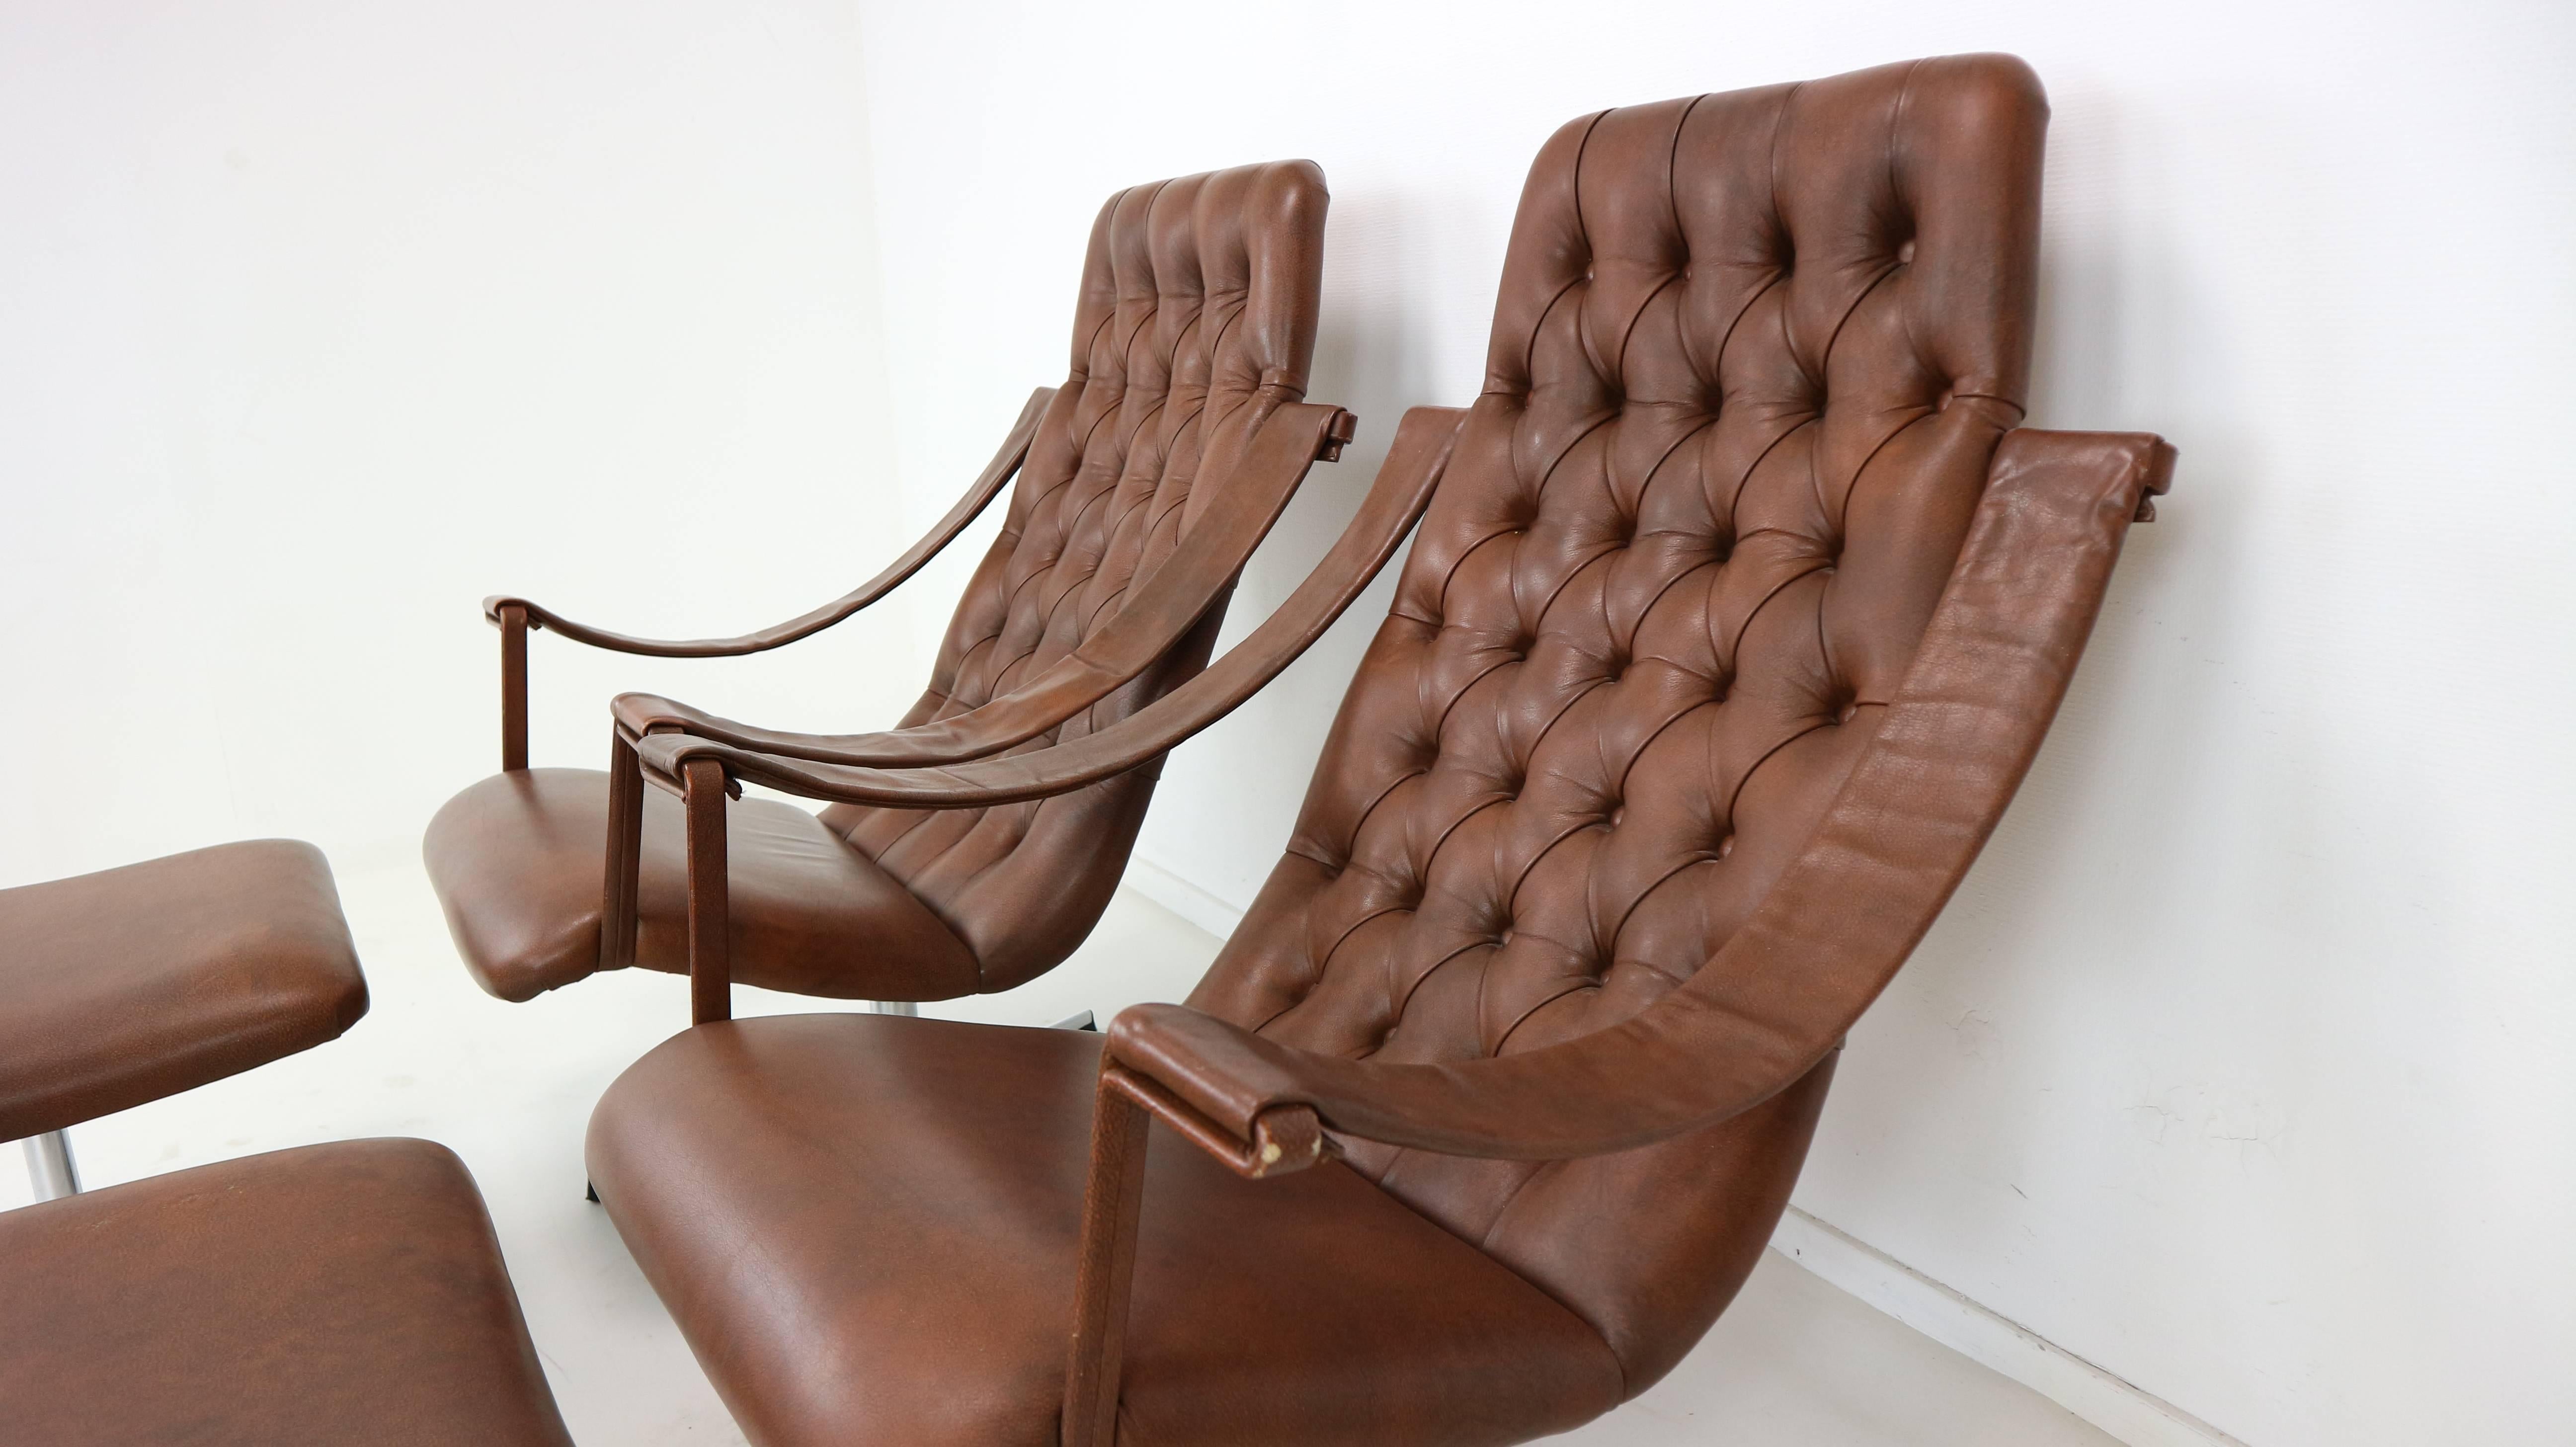 Two rare lounge swivel chairs and ottoman, rust-brown skai leather upholstery, free hanging armrests and a swivel chrome base. The lounge chair with the unusual armrests is designed by Geoffrey Harcourt for Artifort Netherlands, 1960s.